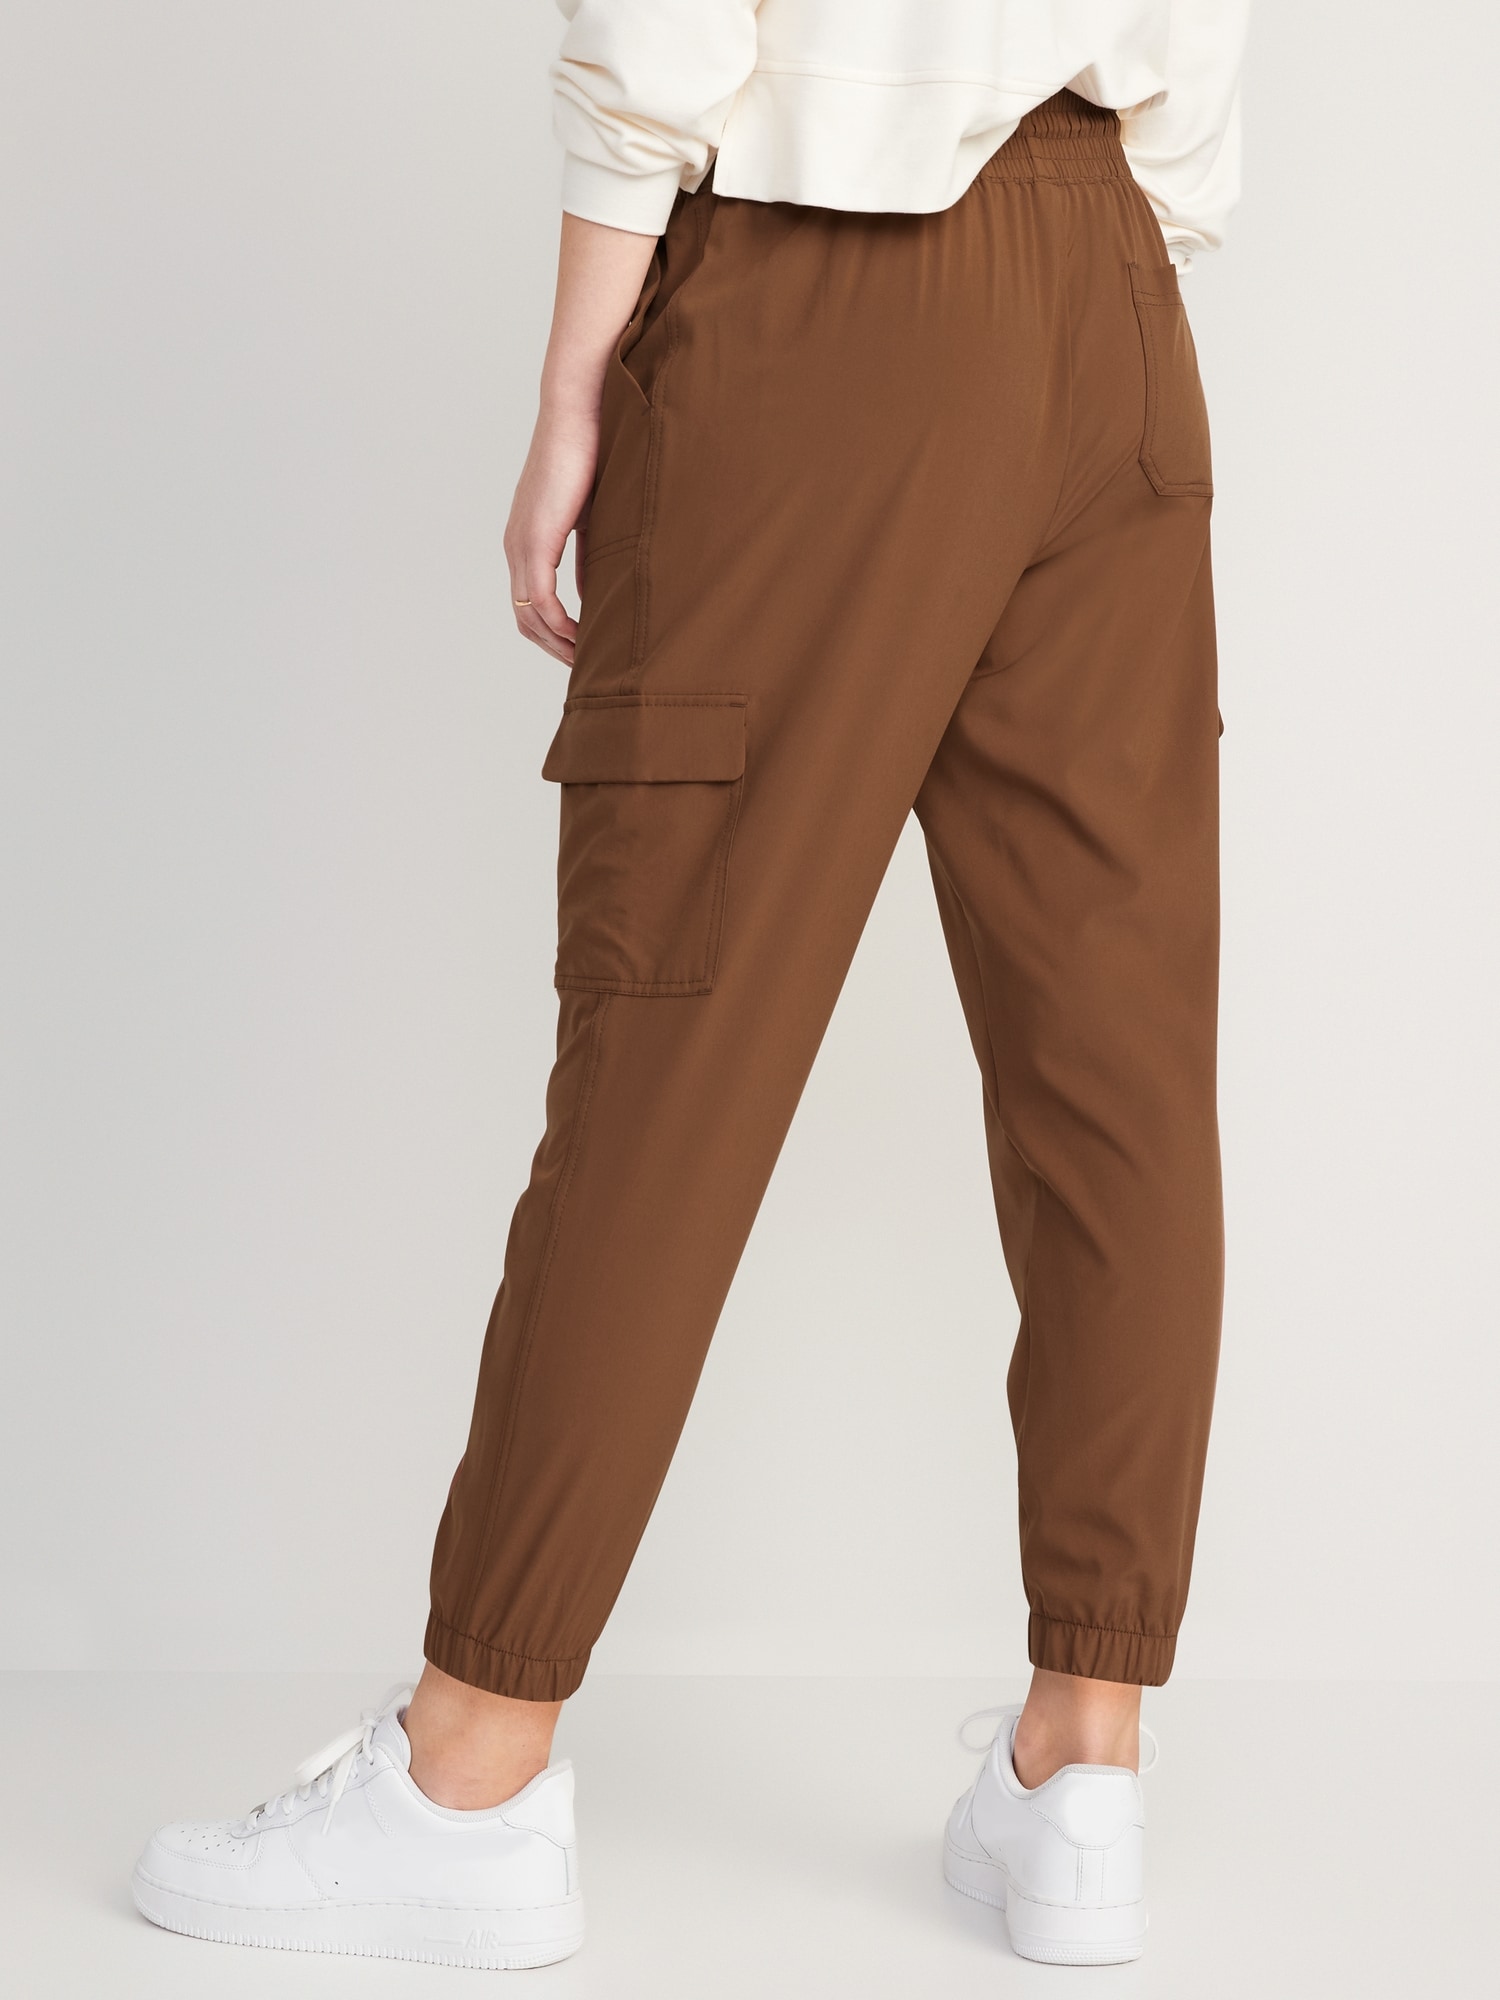 Women's High-rise Pleat Front Tapered Chino Pants - A New Day™ Tan 6 :  Target